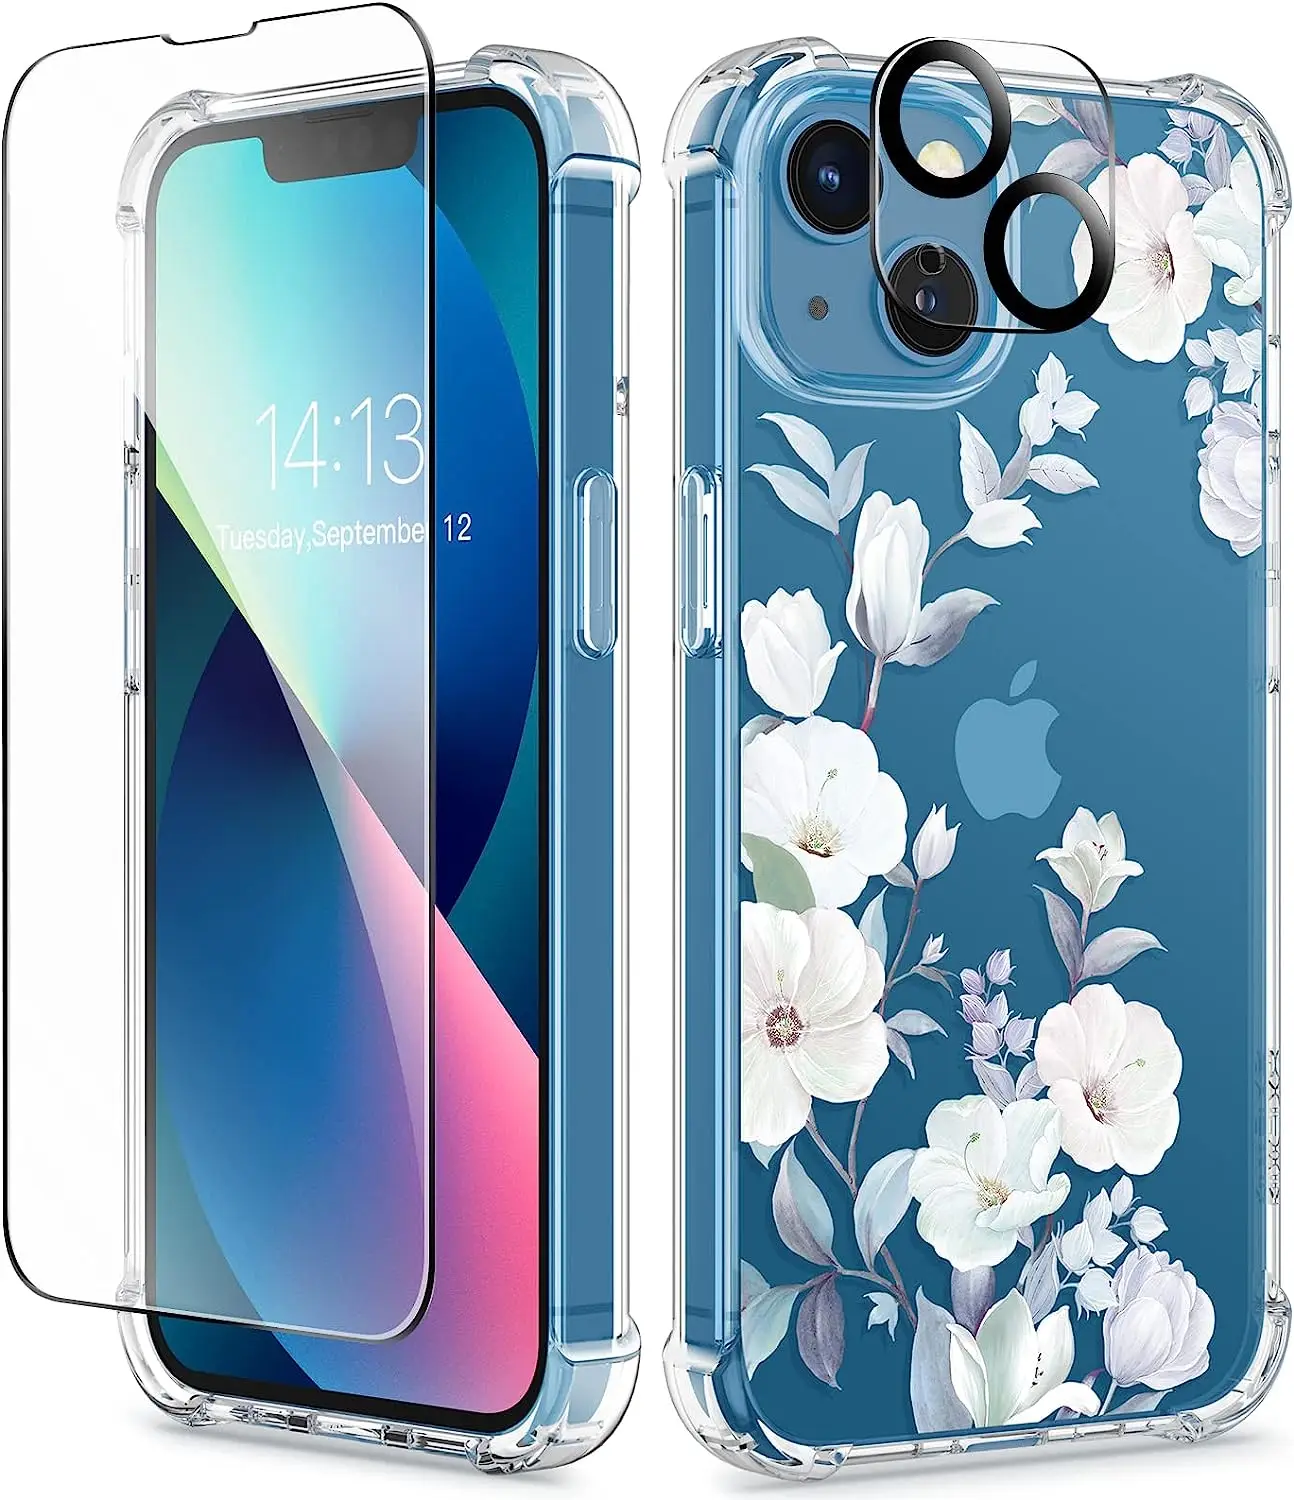  GVIEWIN for iPhone 12 Case and iPhone 12 Pro Case with